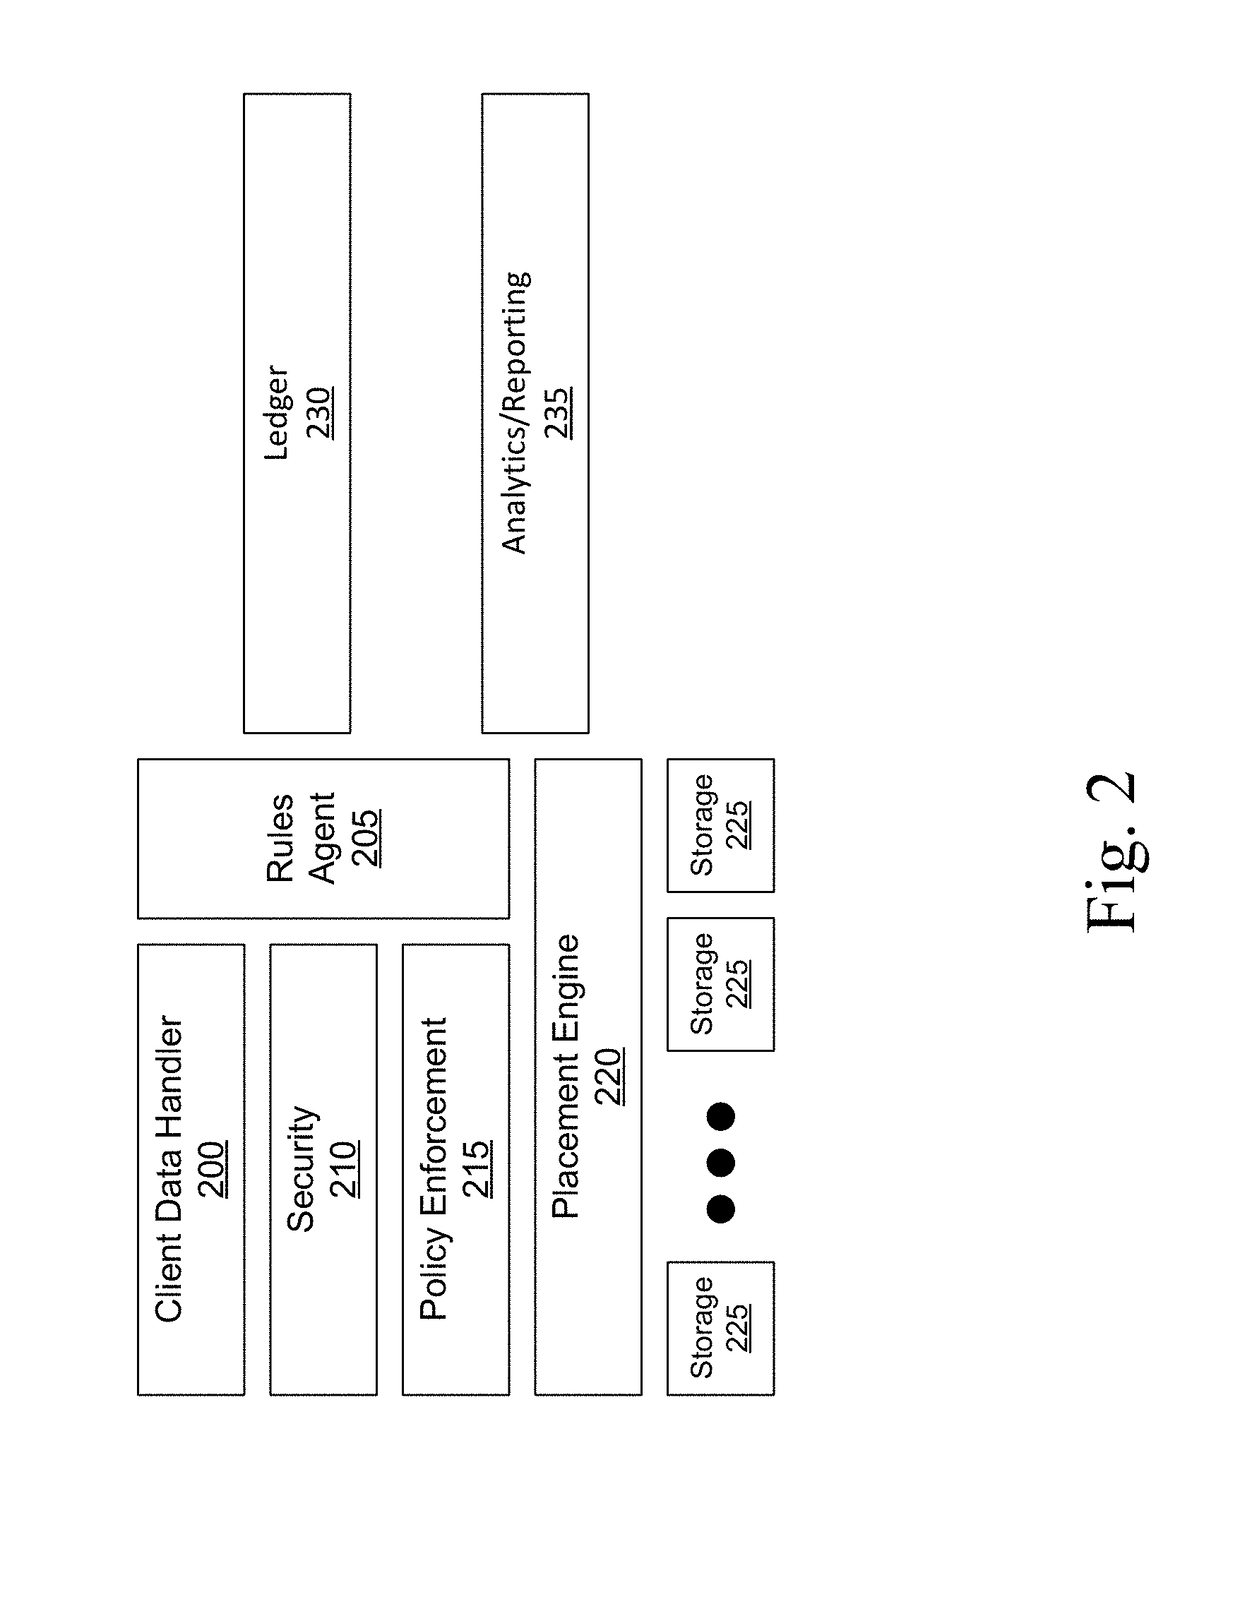 Systems and methods for using a distributed ledger for data handling